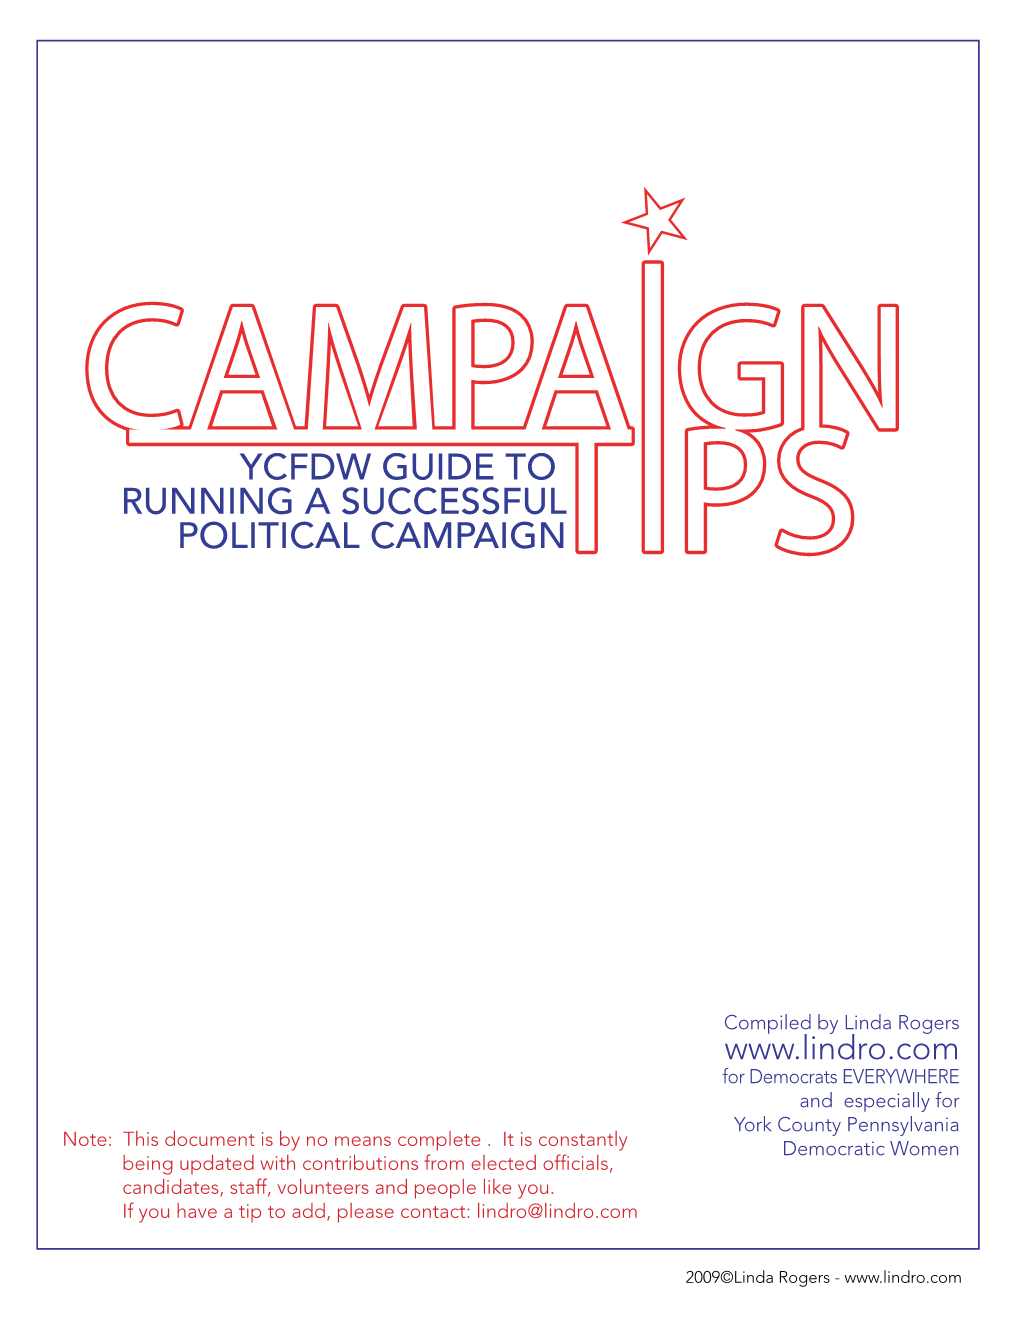 Ycfdw Guide to Running a Successful Political Campaign